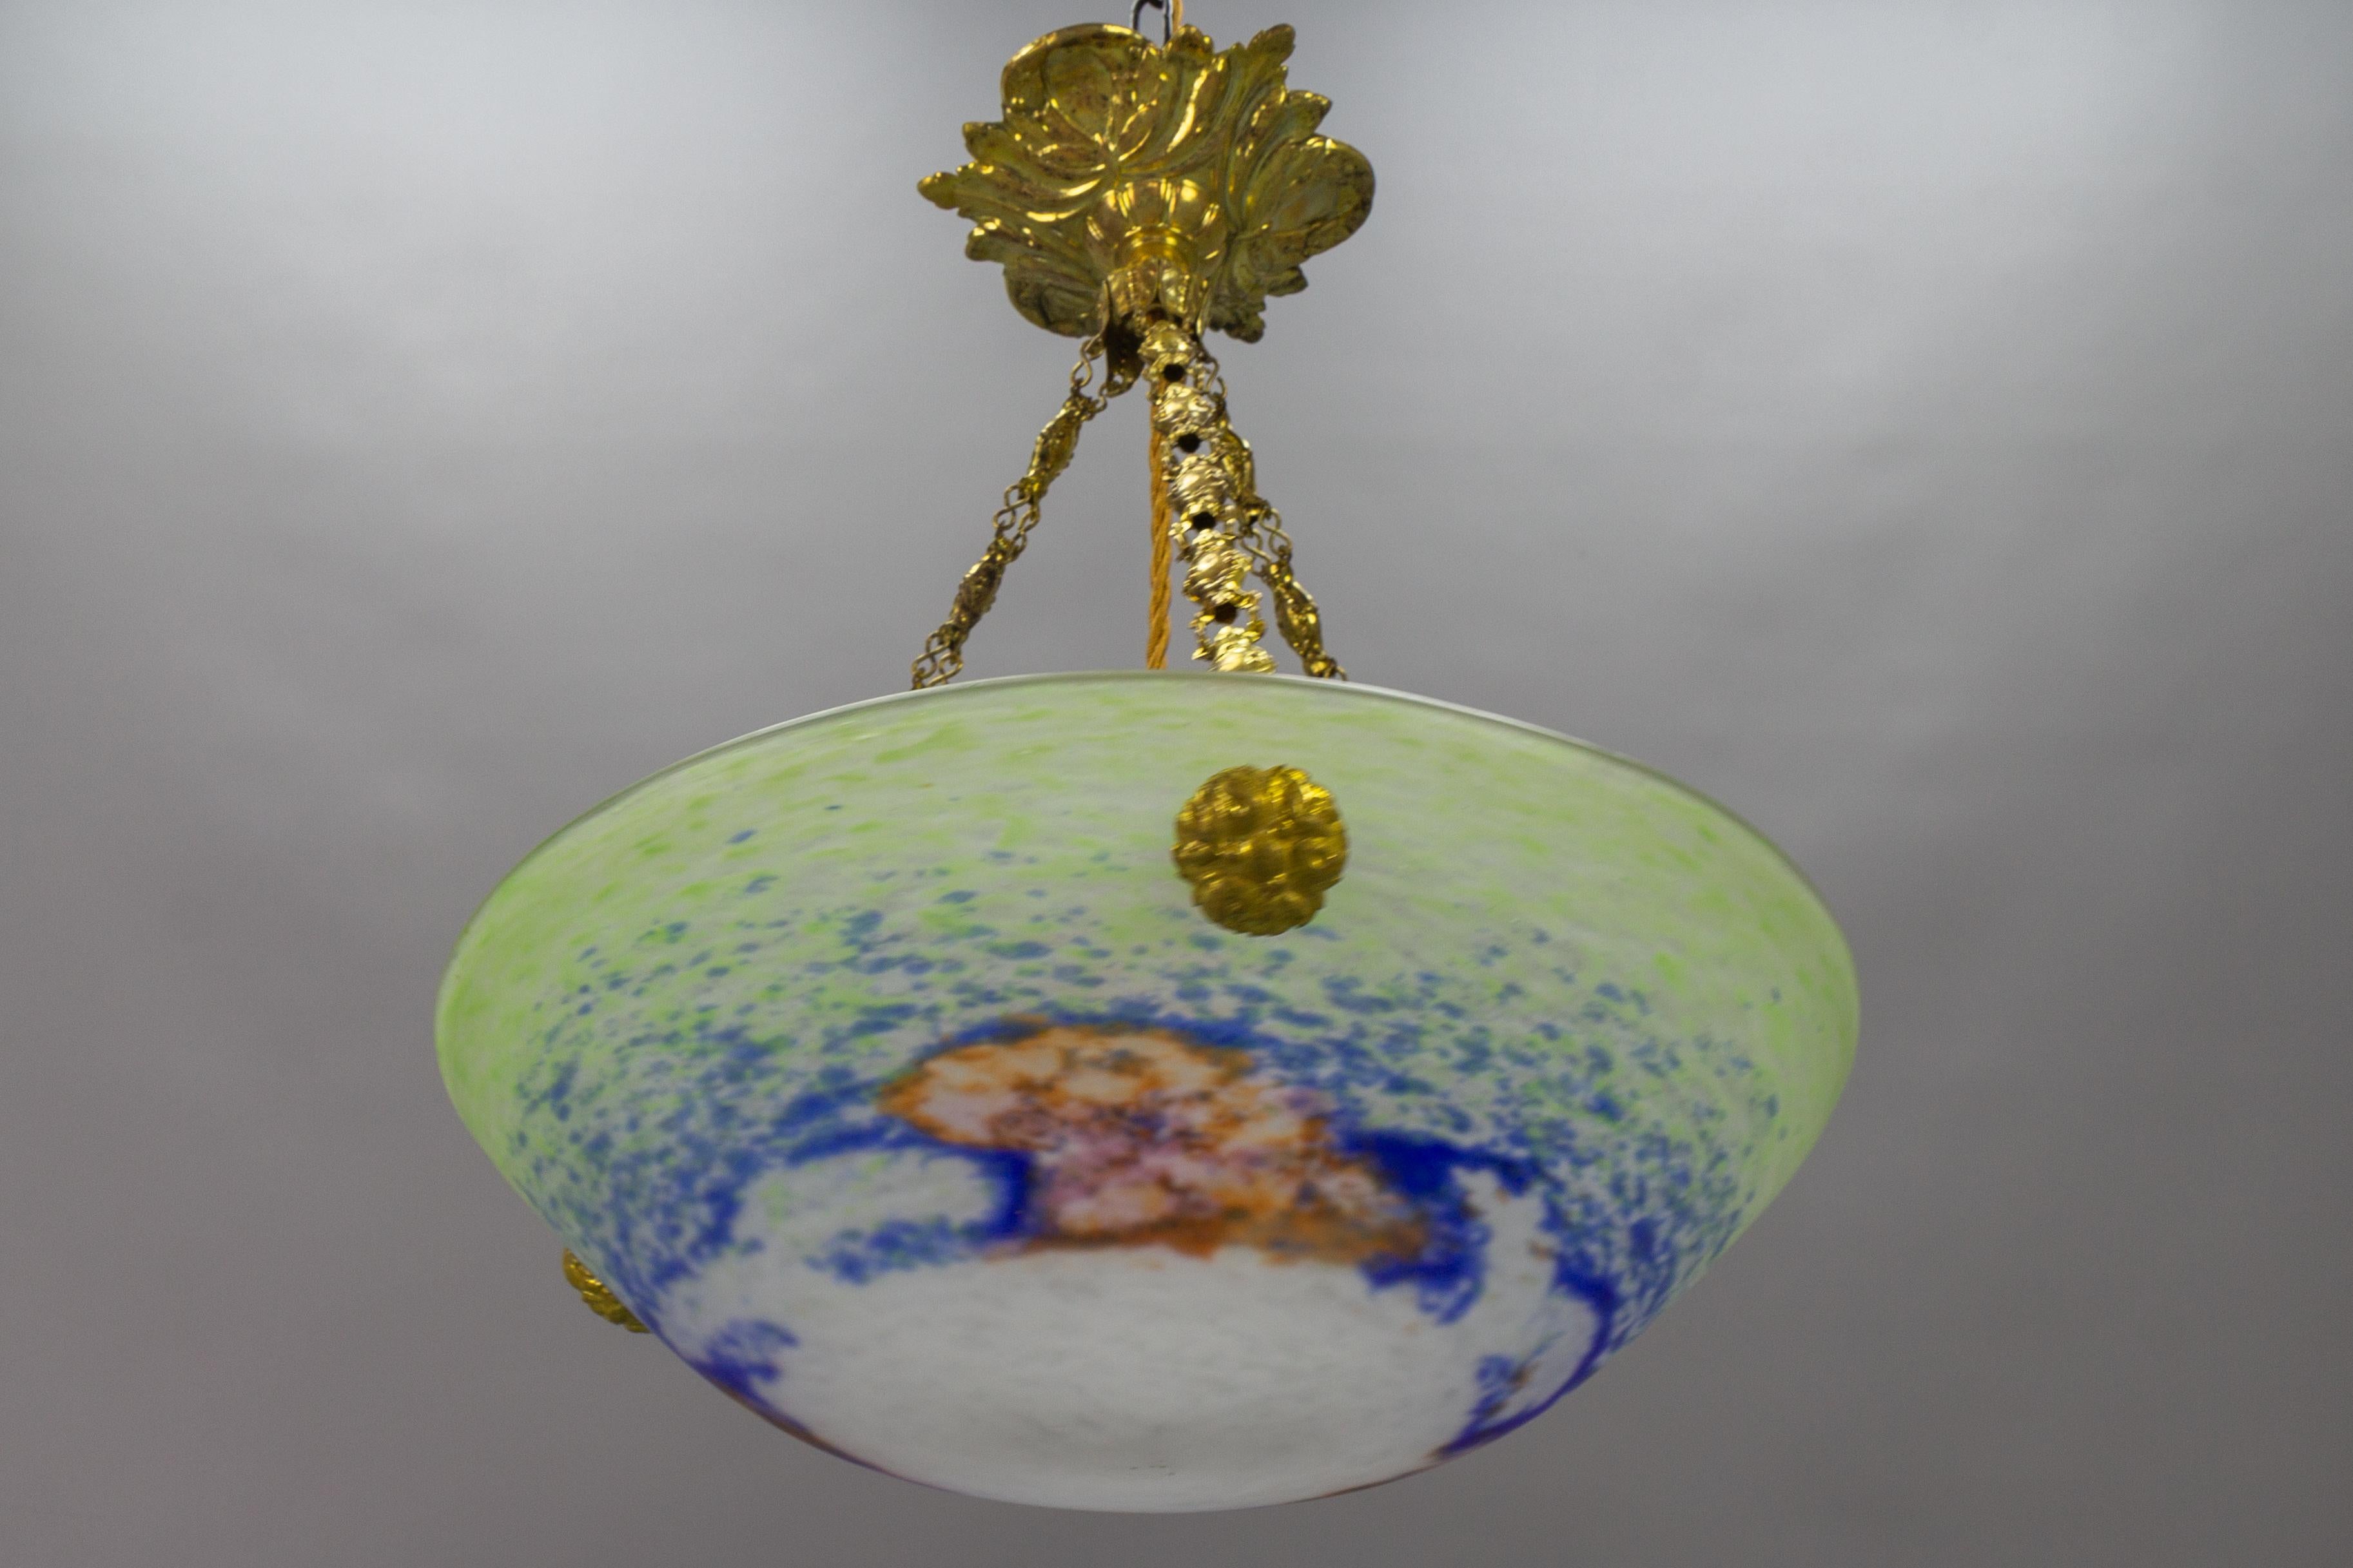 This adorable French Art Nouveau period pendant chandelier features a mottled “Pâte de Verre” art glass bowl in green, blue, and white color with orange and pink accents, attributed to Jean Noverdy, hung at an ornate brass canopy. The pendant light